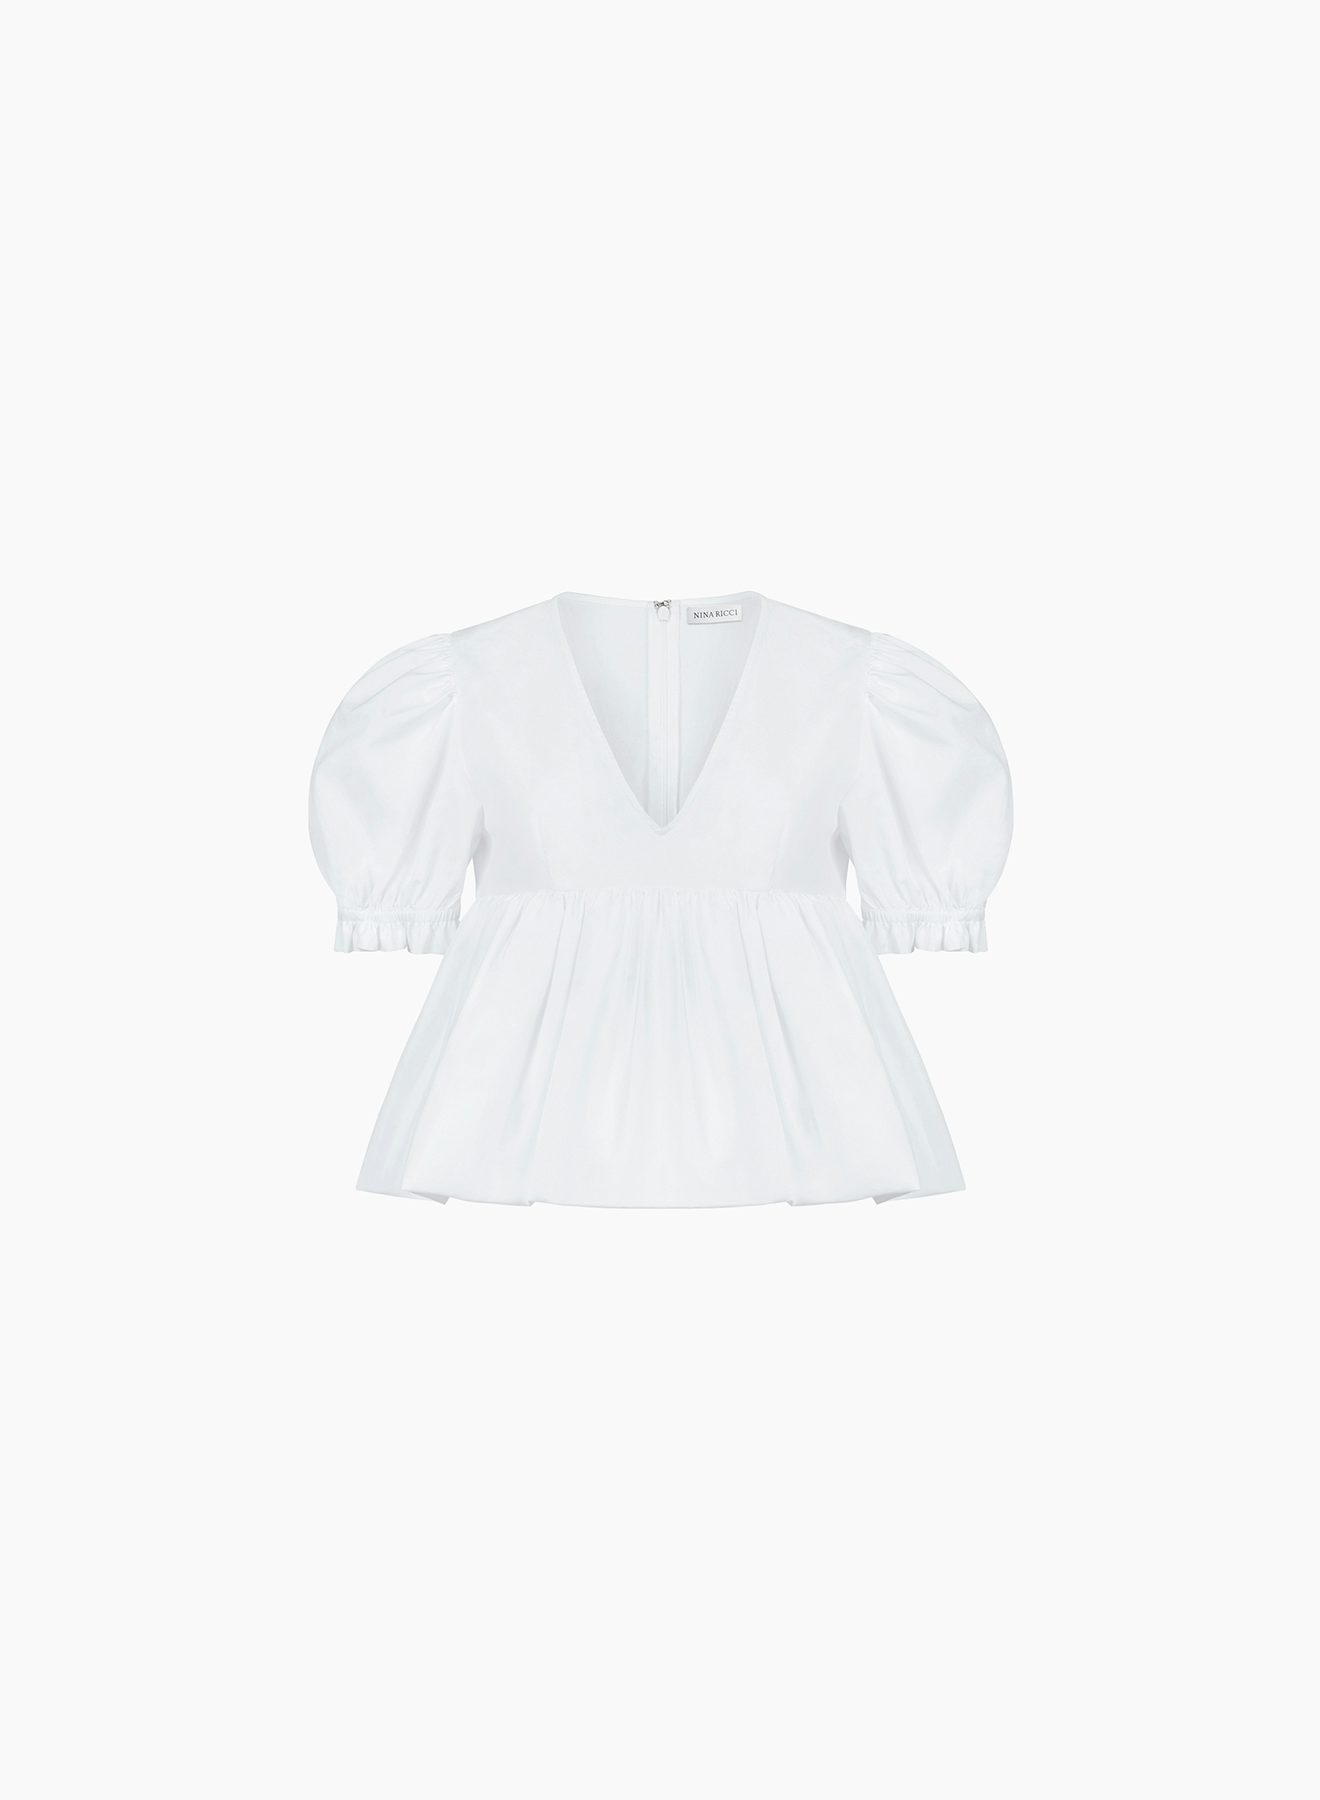 Babydoll top with ruched sleeves in white - Nina Ricci